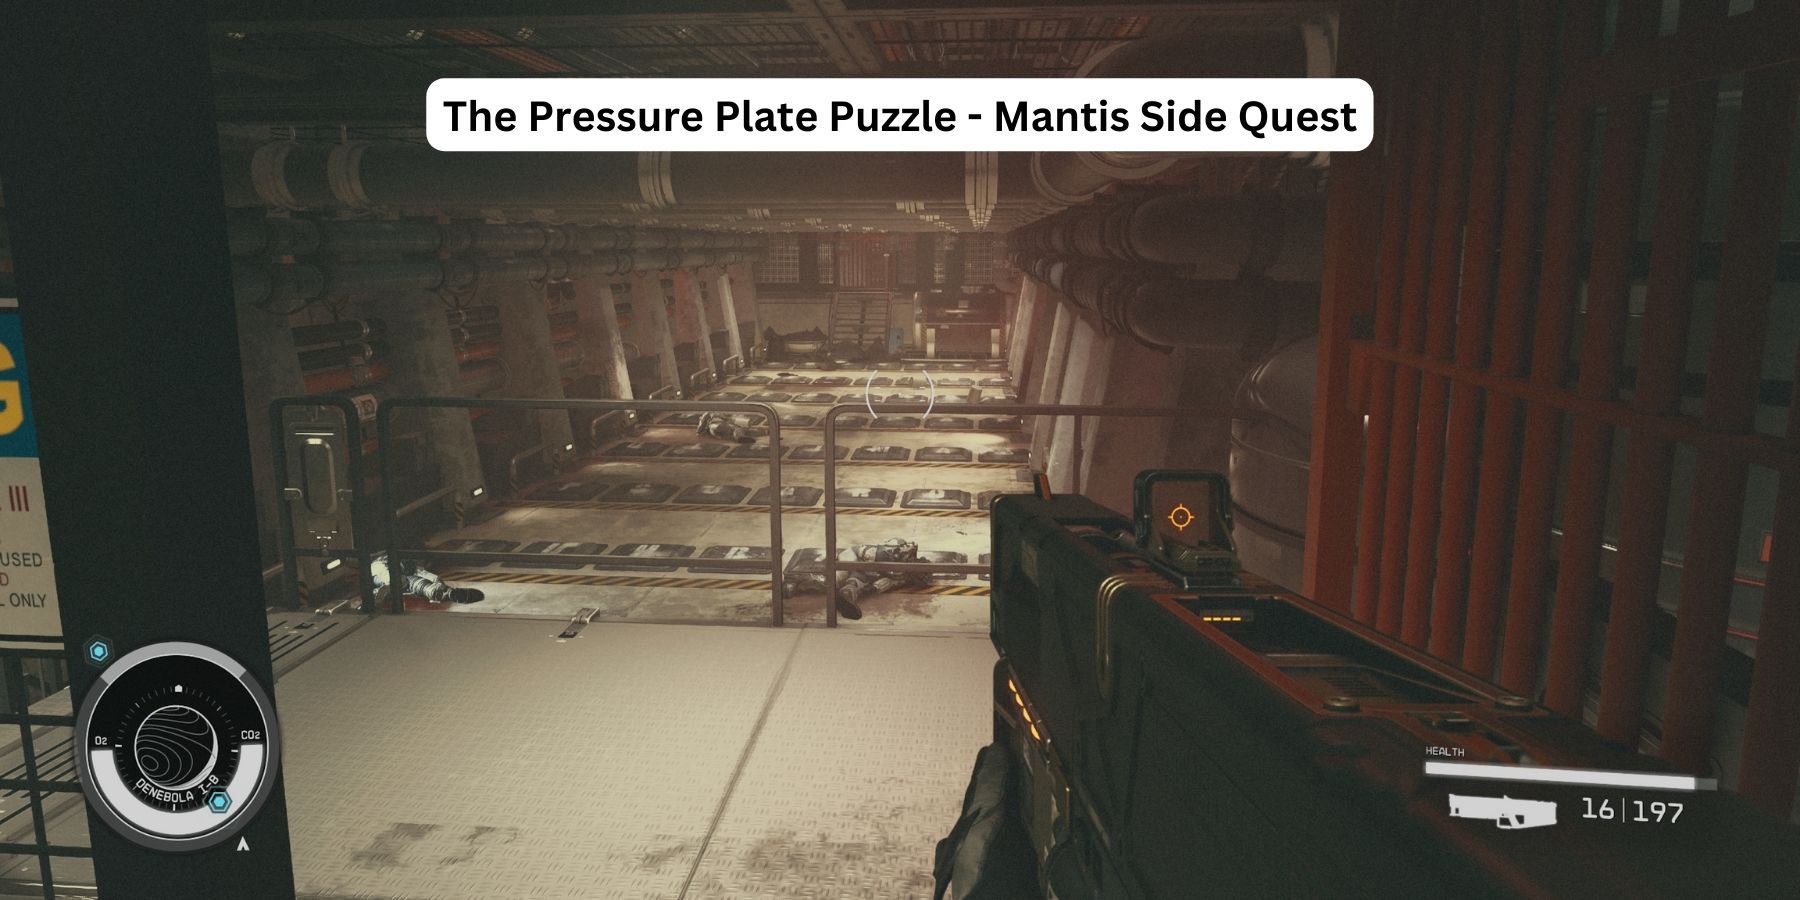 image showing the pressure plate puzzle in the lair of mantis in starfield.